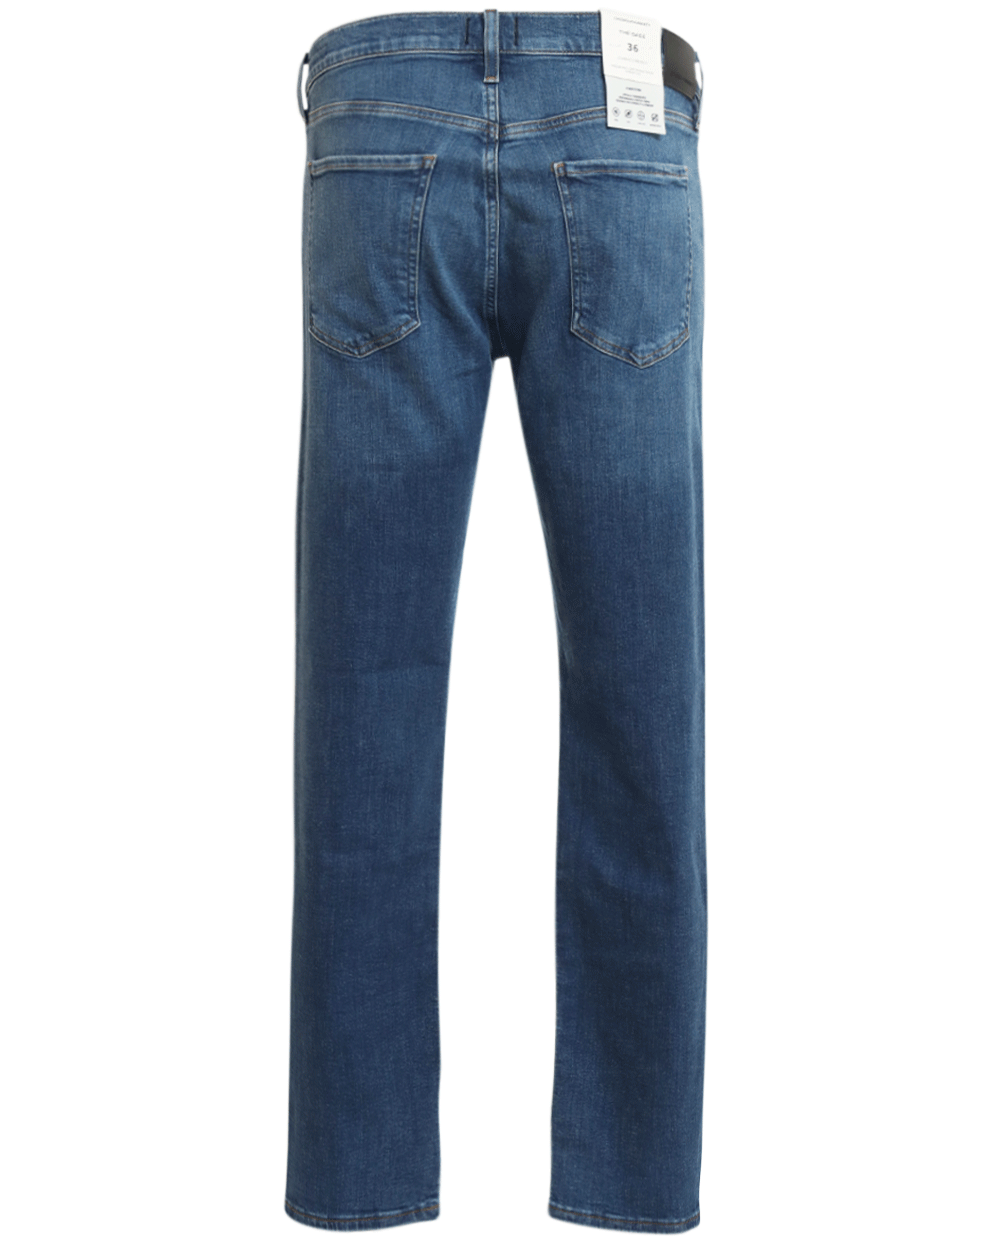 Gage Classic Straight Pant in Seville